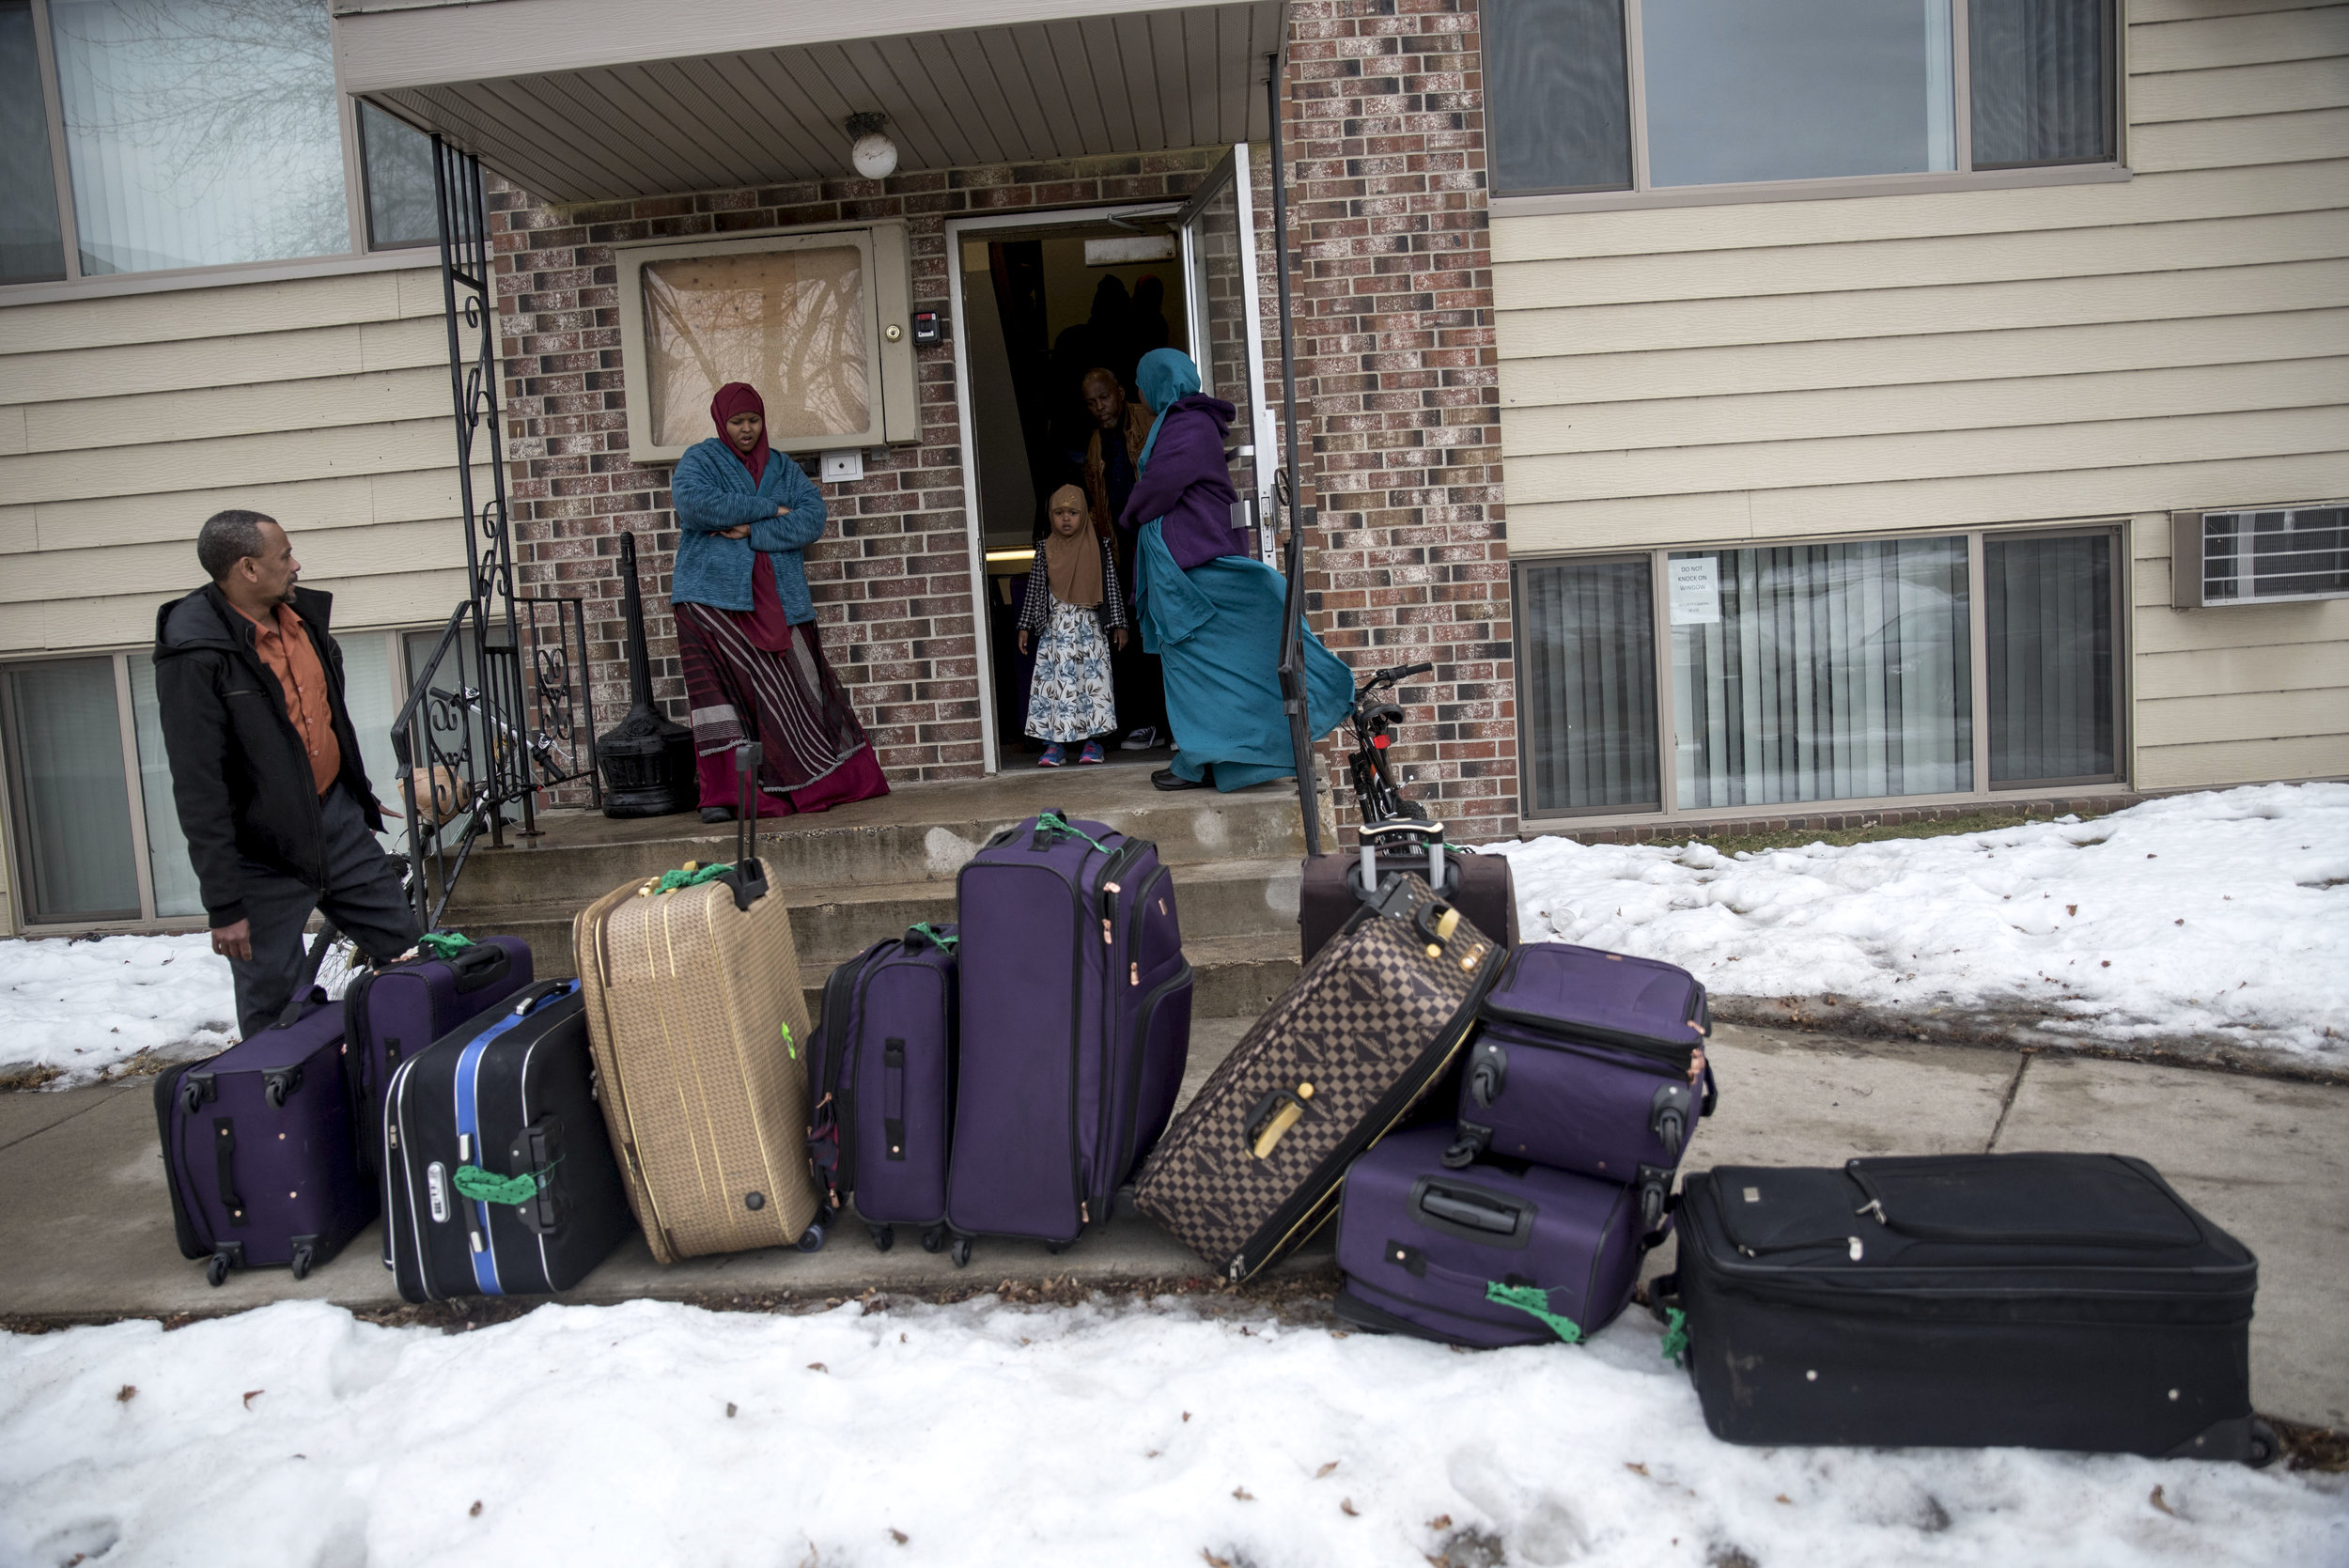  Kosar and her family members carry suitcases out of their apartment in Willmar to leave for the Minneapolis-Saint Paul International Airport Mar. 4, 2018. Eight of Kosar’s siblings and her two parents are flying back to stay in Garissa, a city in Ke